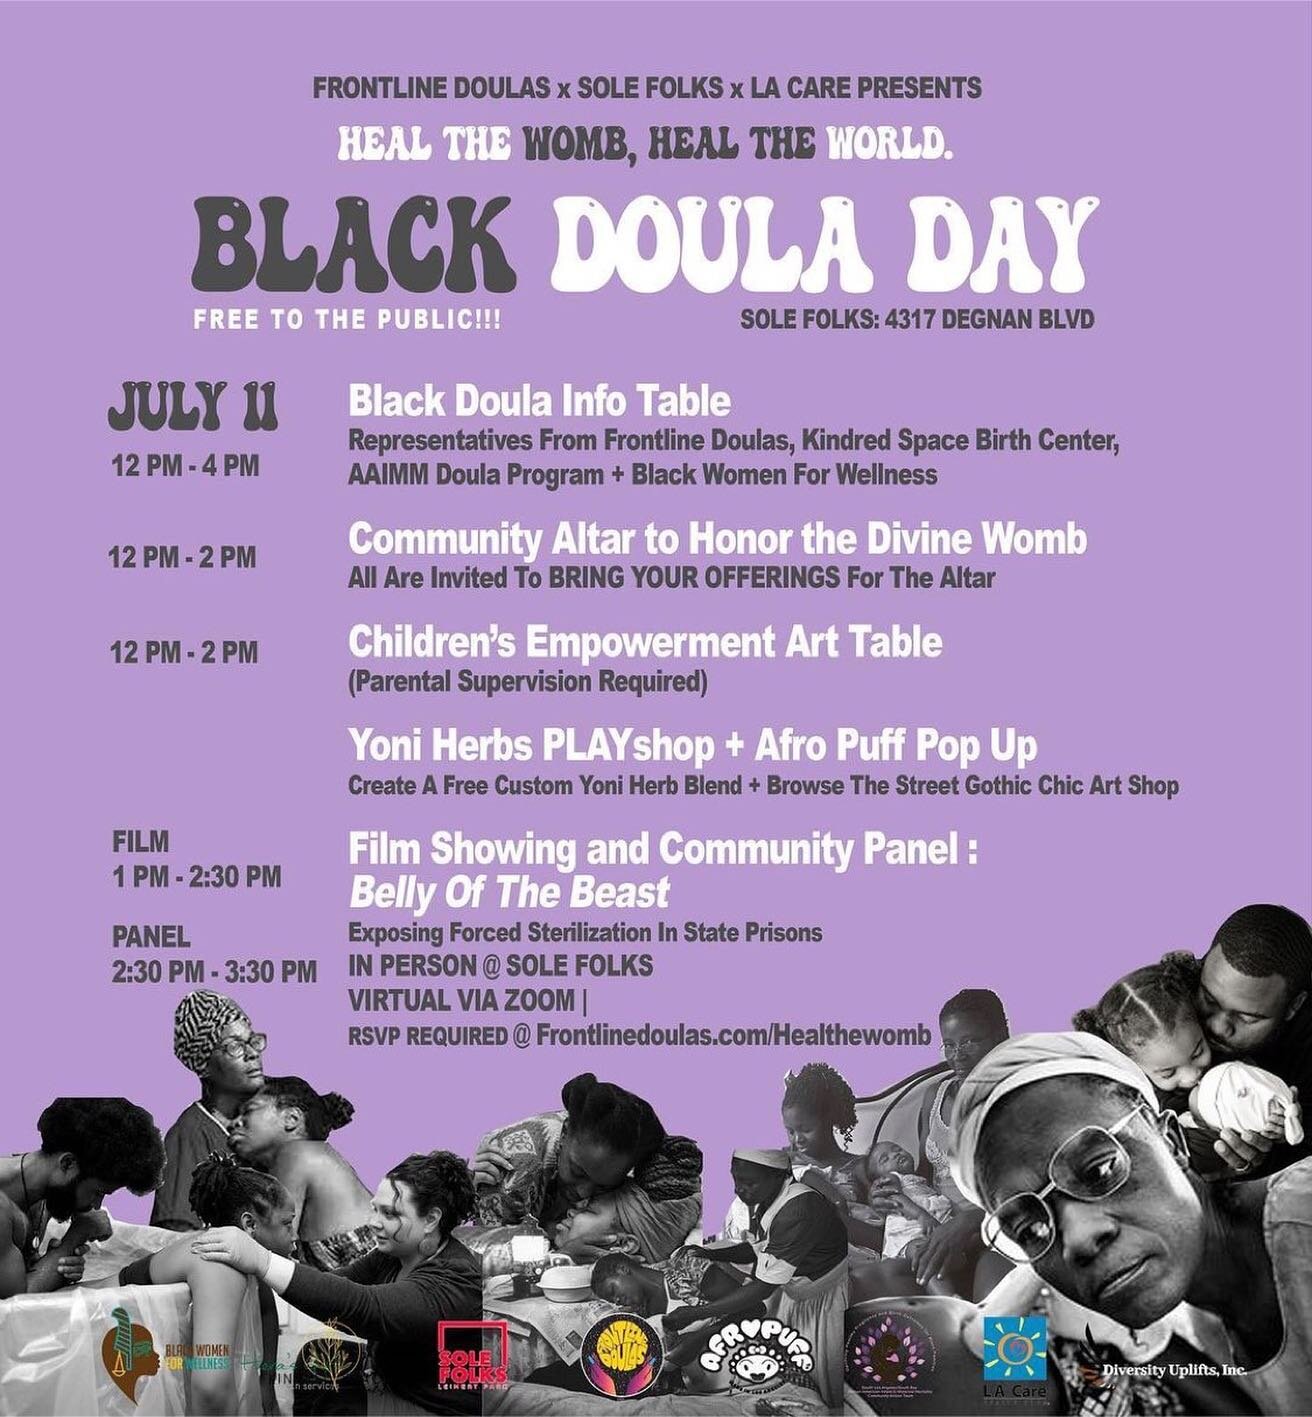 SEE YOU TOMORROW FAMILY💜 FREE TO THE PUBLIC + Farmer&rsquo;s Market as well. 
&bull;
THIS WEEKEND!  It is going to be 🔥  Sunday July 11th, 12-4pm

Spend the afternoon with us! Black Doula Info Table, DJ Bsmooth and MC Danae, Children&rsquo;s Art Em